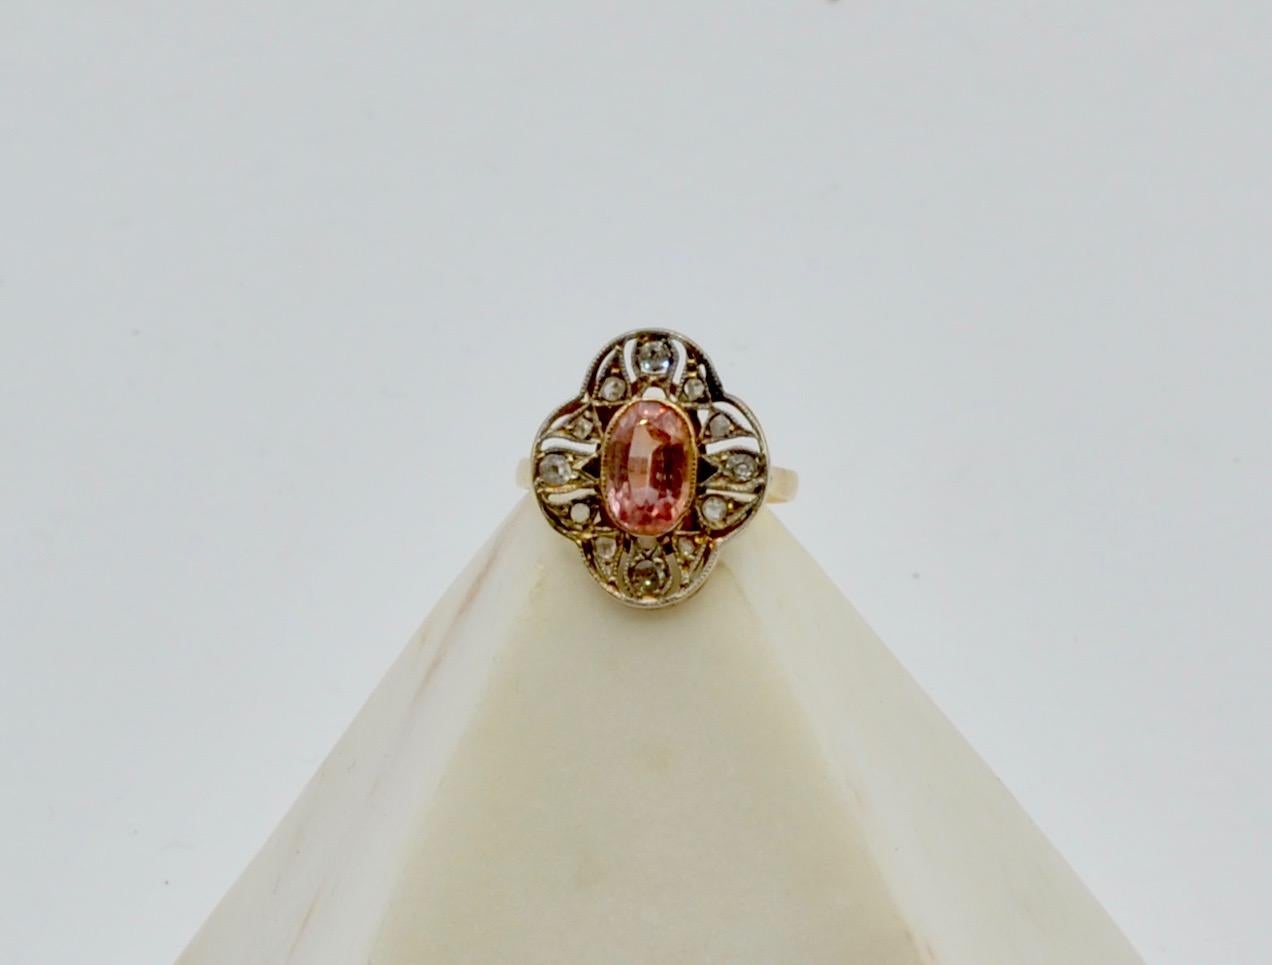 Padparadschah Oval Sapphire Approximately 1.10 Carat, Diamond & 14 Karat Ring In Excellent Condition For Sale In Berkeley, CA